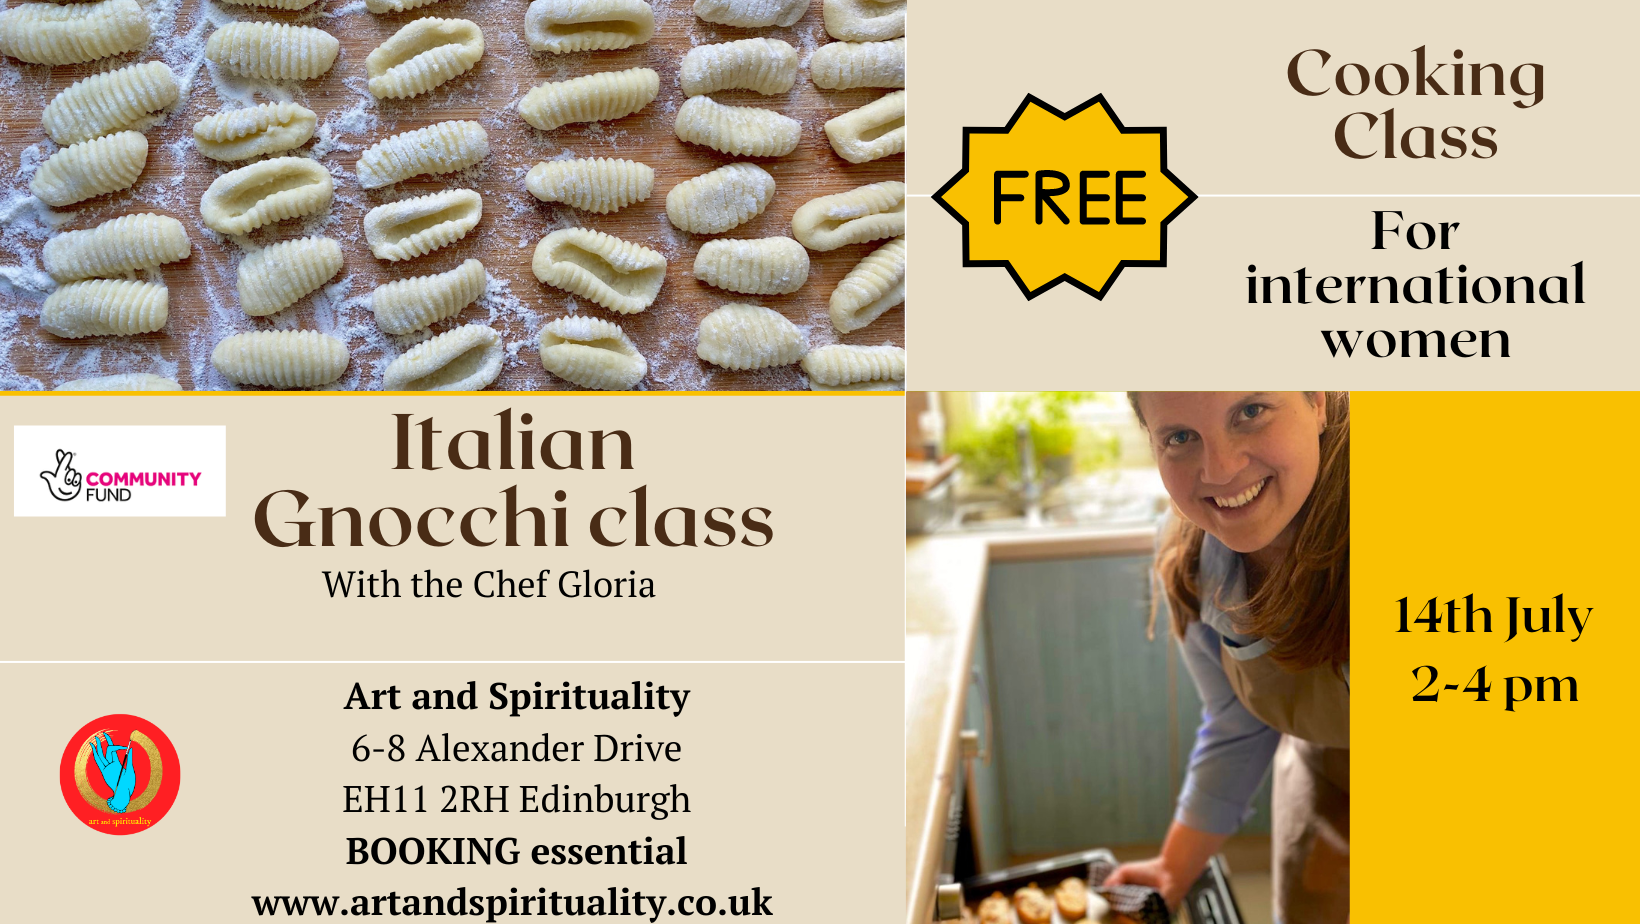 14th July afternoon FREE COOKING CLASS: ITALIAN GNOCCHI for international women